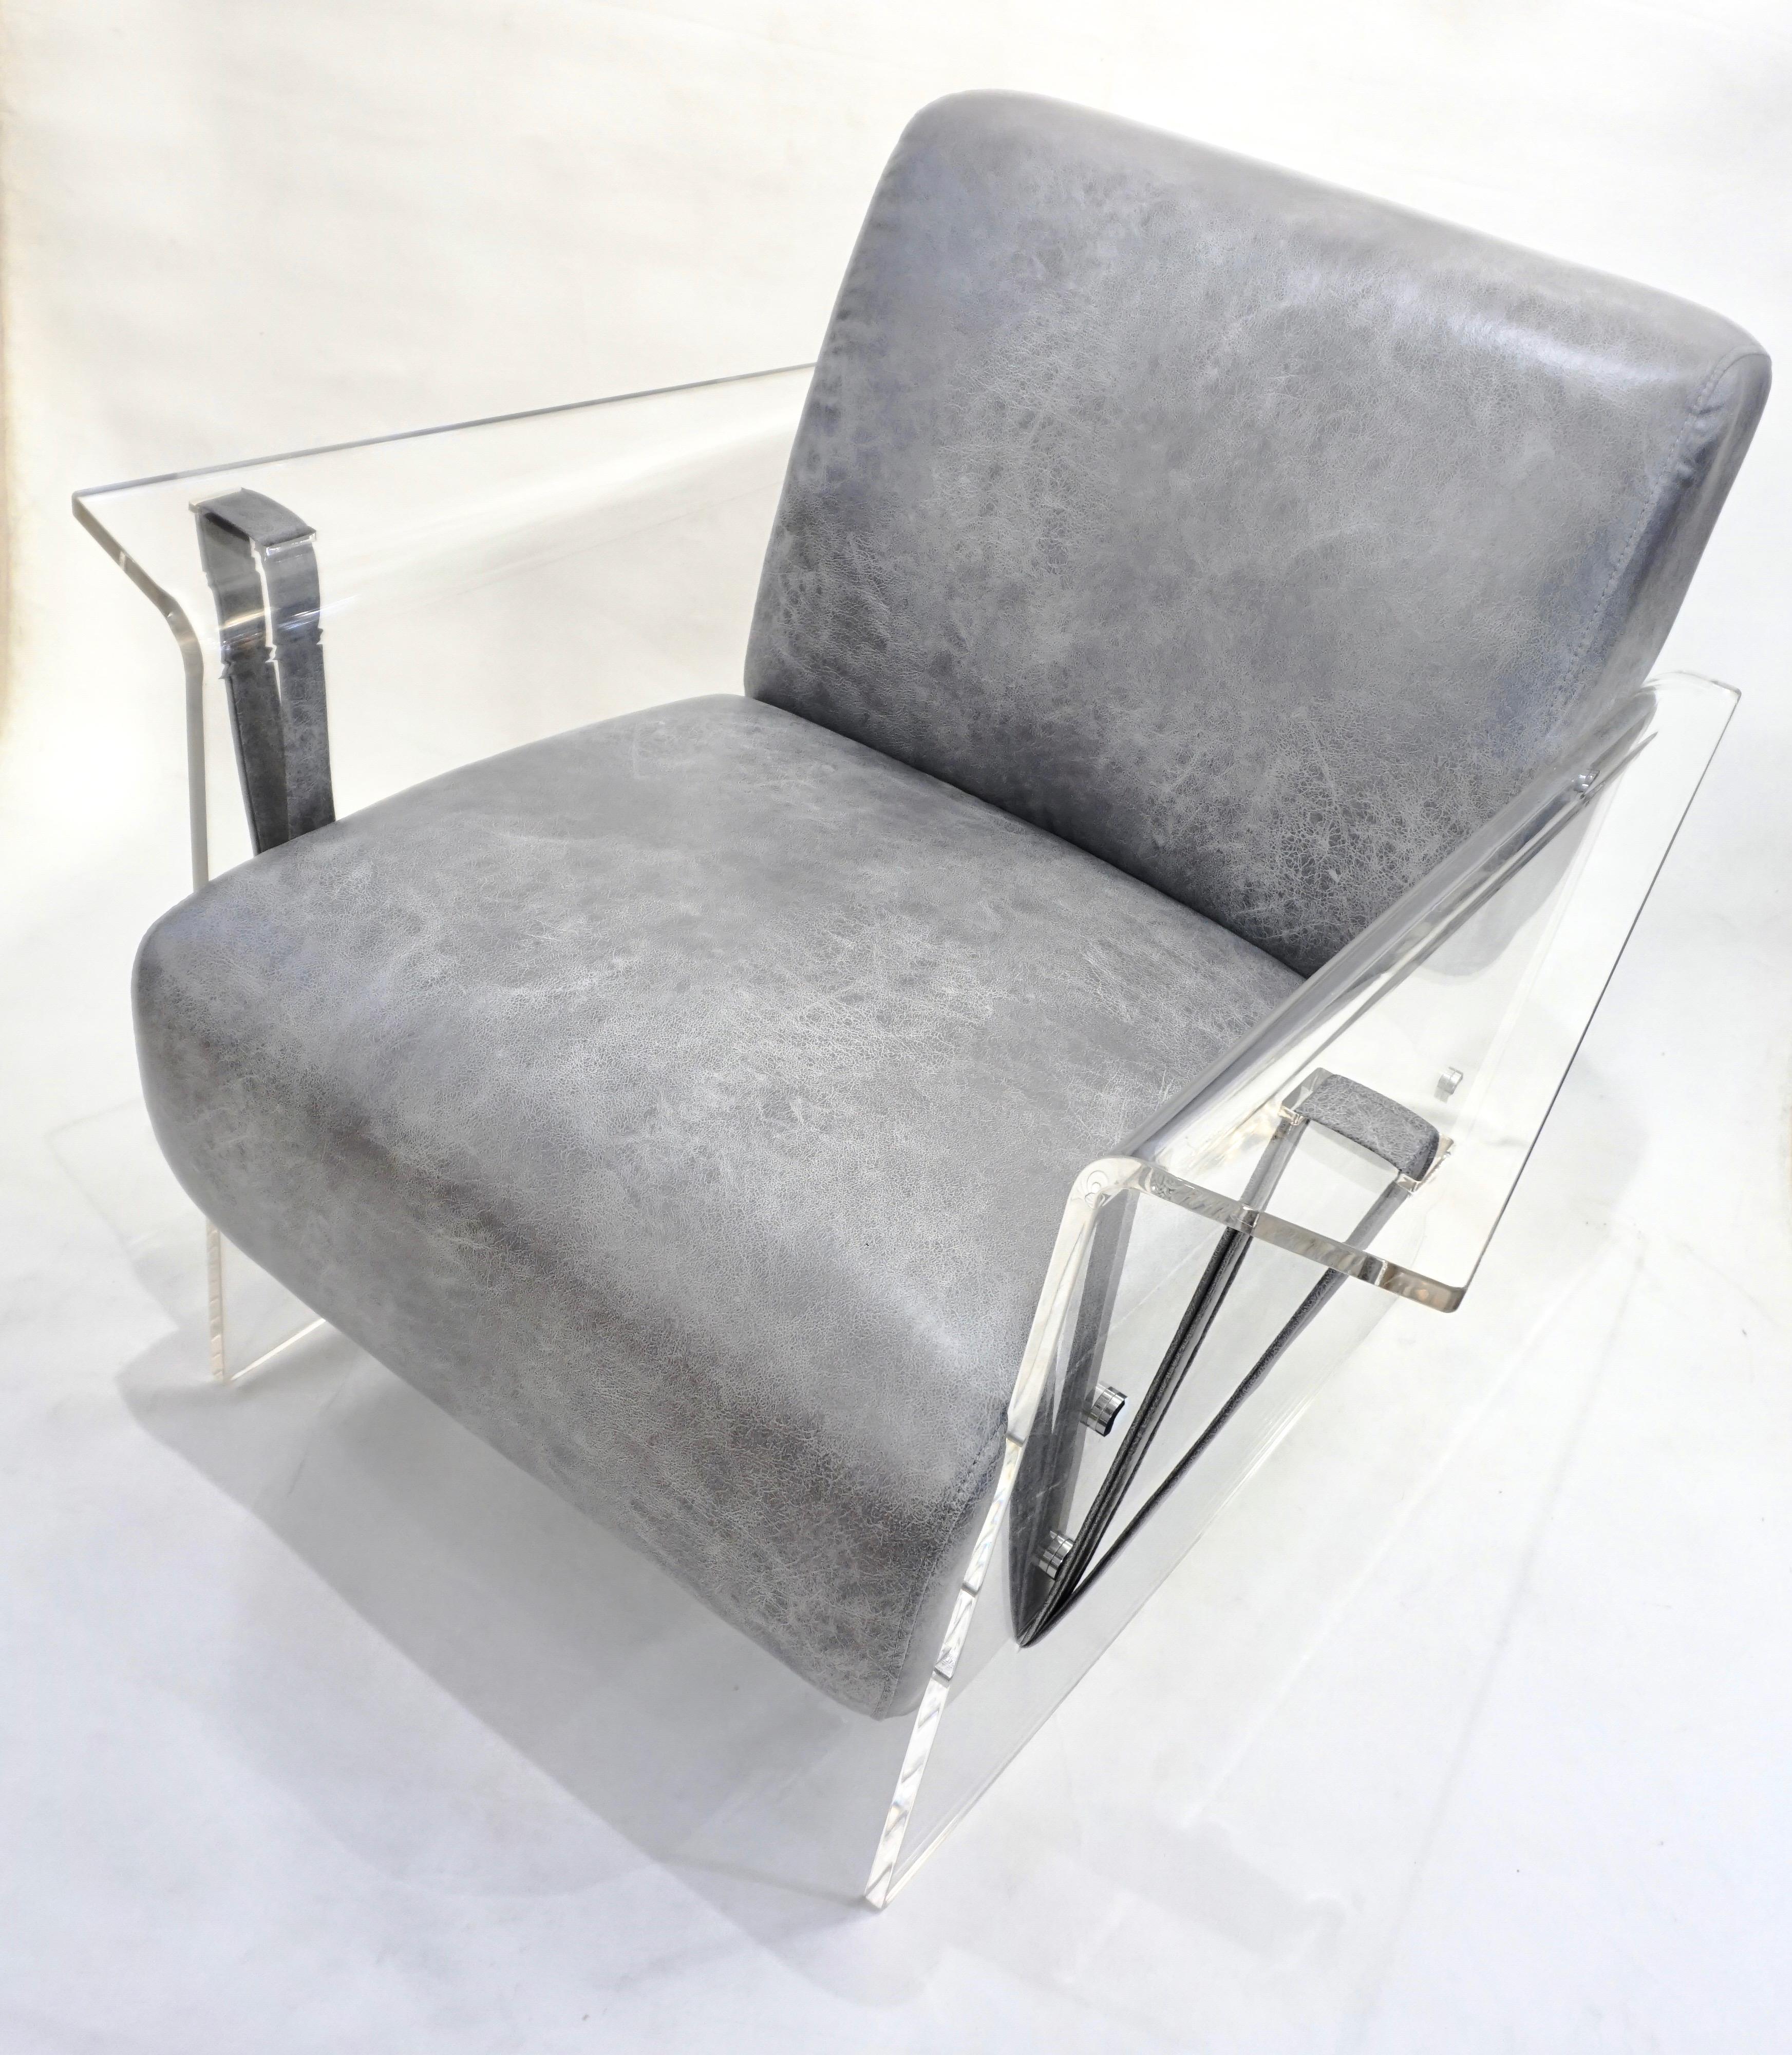 A very interesting contemporary loft armchair of modern sleek organic design enclosed in Minimalist upright seamless Lucite supports with chrome bolts and reversed armrest in a continuous line, accented on each side with a simple belt, ingeniously